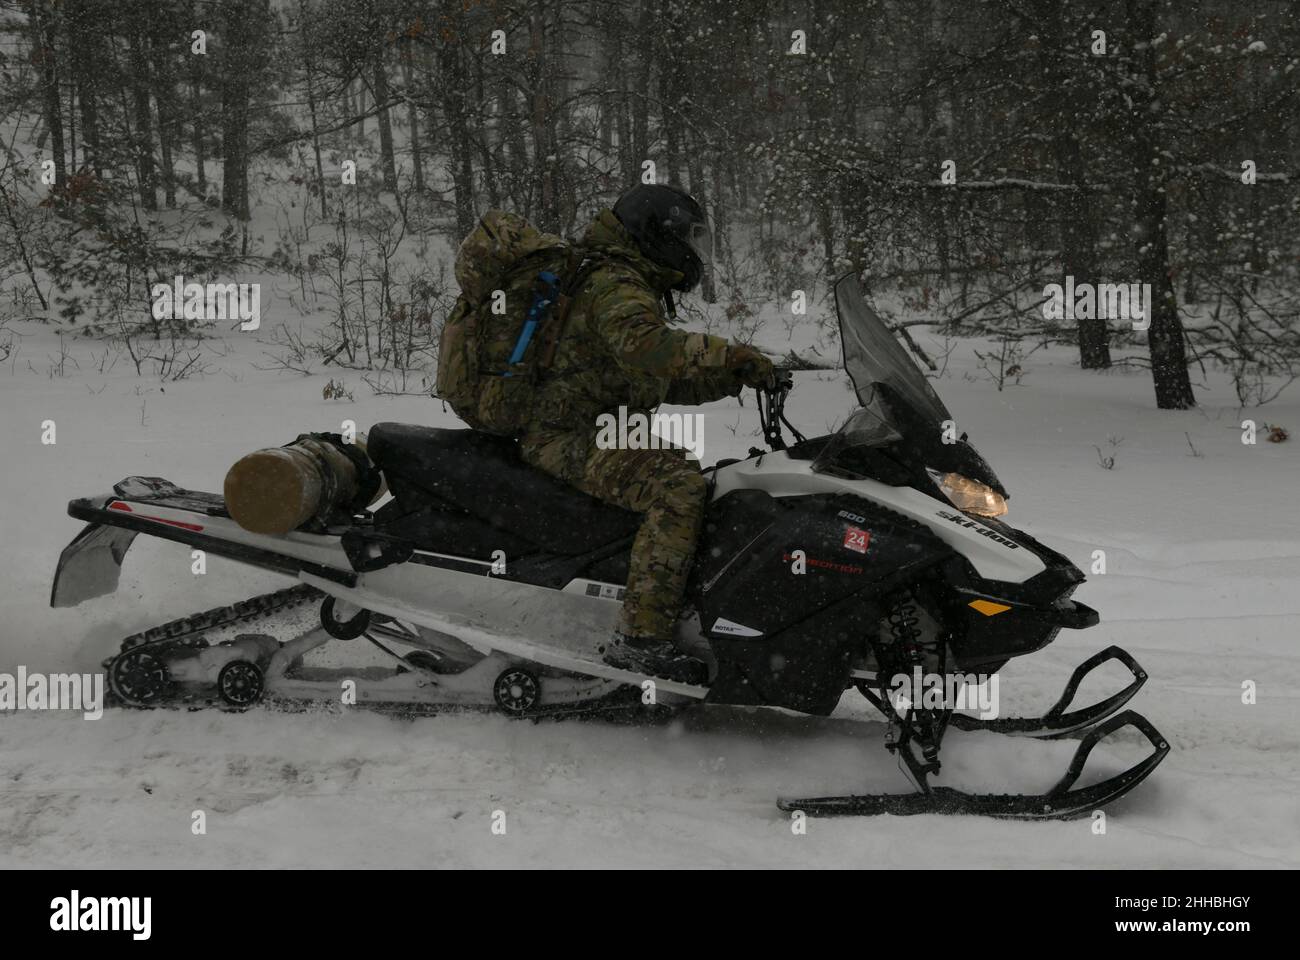 U.S. Army Soldiers from the 20th Special Forces Group, Massachusetts Army National Guard, conduct snowmobile training during Northern Strike 22-1, at Camp Grayling, Mich., Jan. 22, 2022. The winter iteration of the Northern Strike exercise series, known as “Winter Strike,” is held annually in northern Michigan during the coldest part of the year, so visiting units can train in subarctic conditions. (U.S. Air National Guard photo by Staff Sgt. Tristan D. Viglianco) Stock Photo